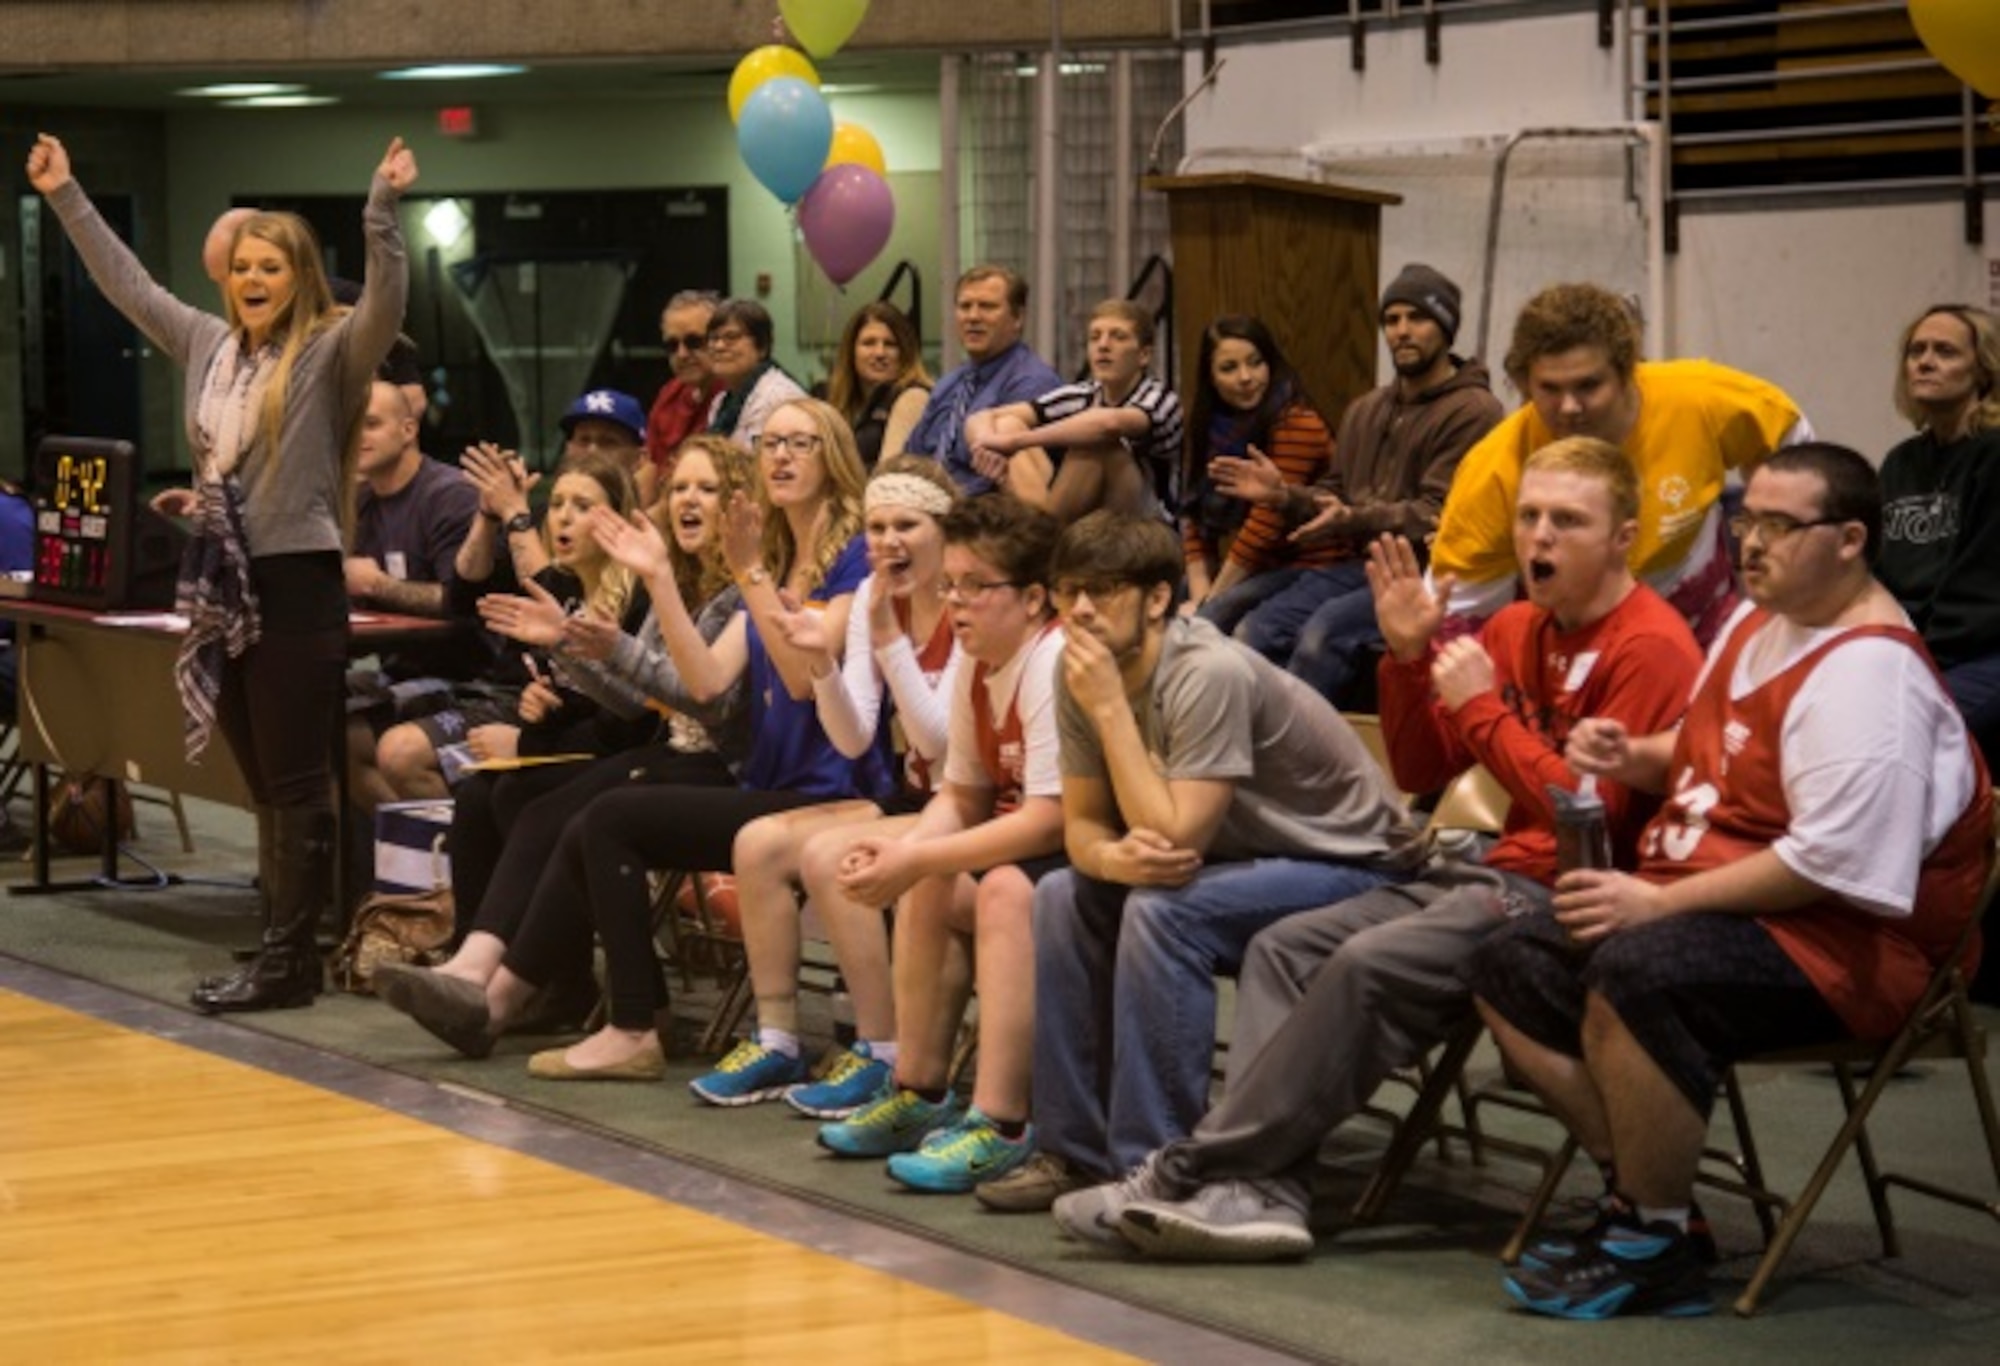 Participants and coaches cheer as their team scores a basket during the North Dakota Special Olympics in Minot, N.D., March 4, 2016. Minot Air Force Base members volunteered at the event as referees and other volunteer positions. (U.S. Air Force photo/Airman 1st Class Christian Sullivan)